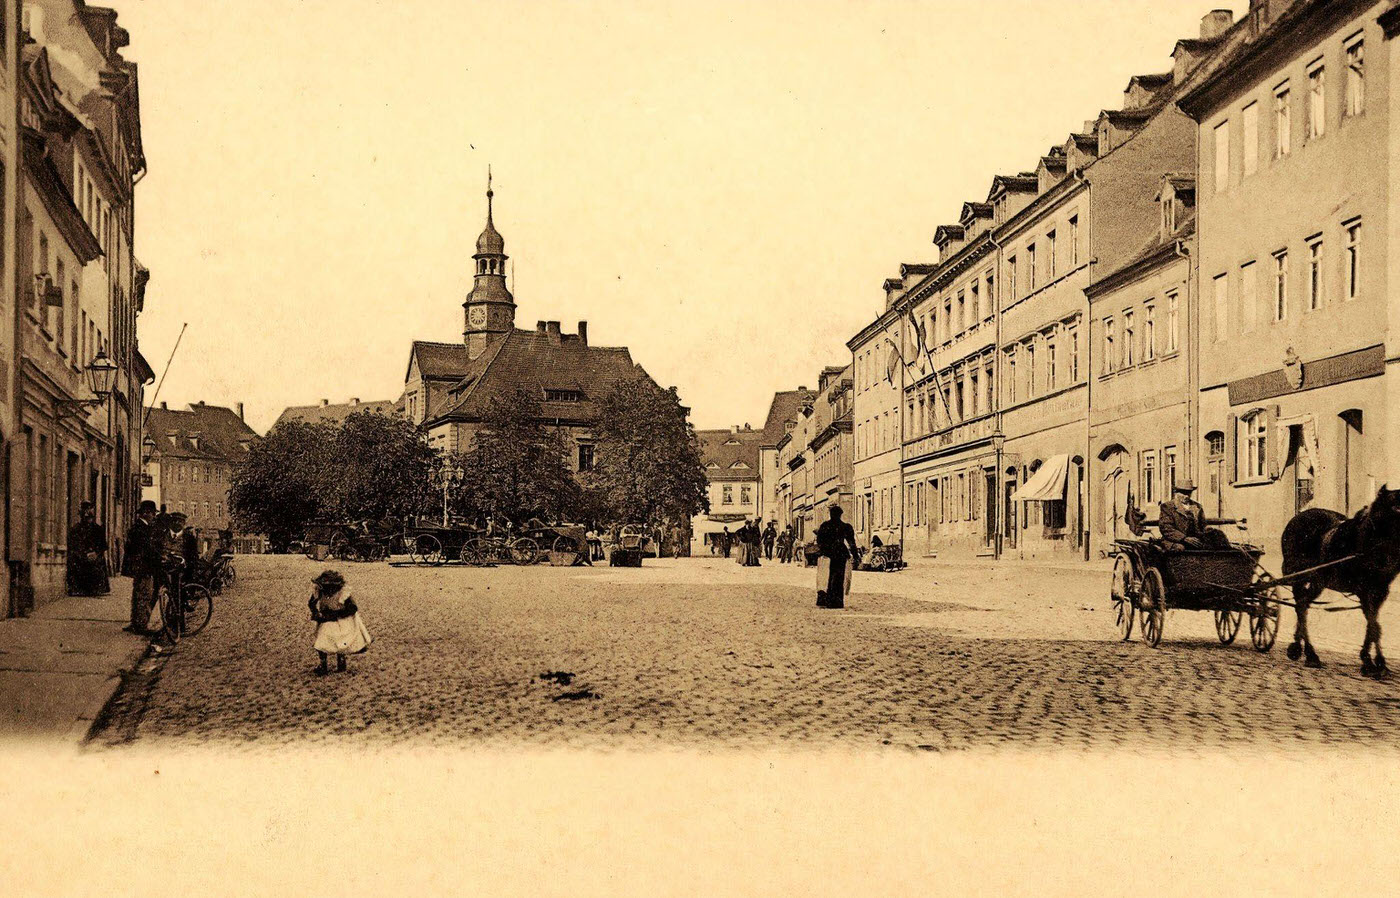 Horses, carriages, town halls, Bicycles in Ronneburg, Thuringia, Germany, 1903.